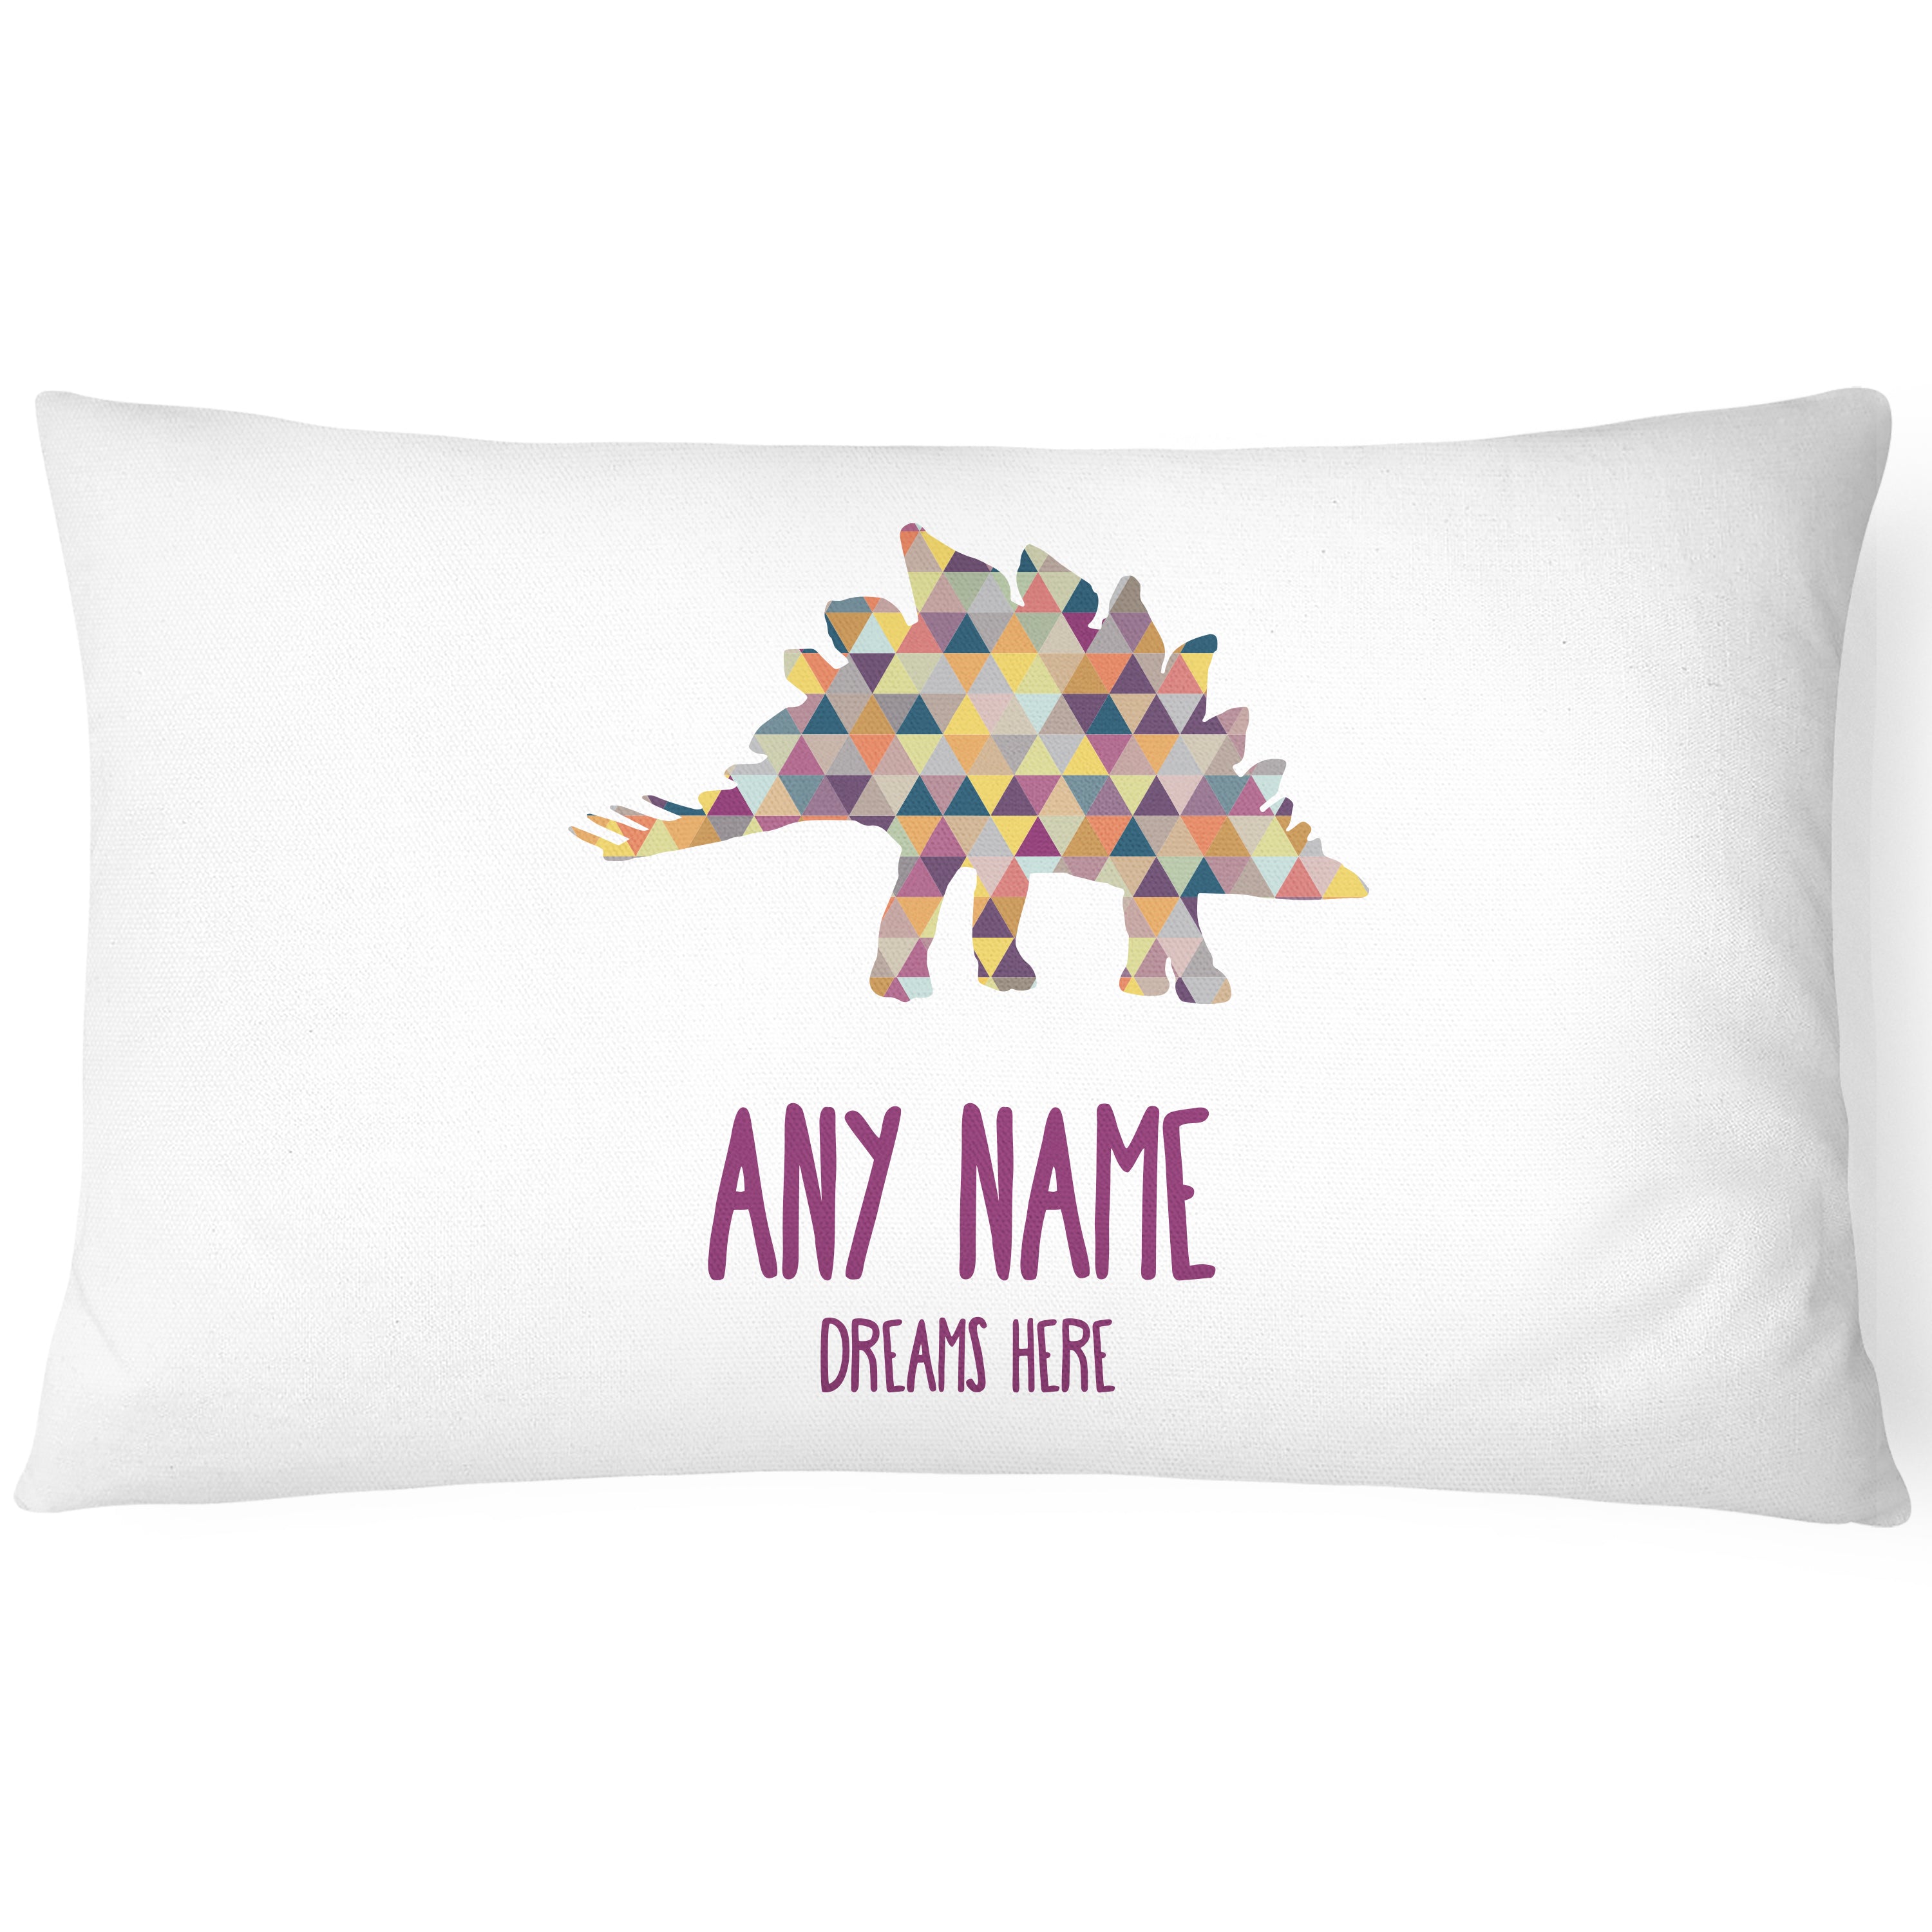 Dinosaur Children's Pillowcase - Personalise with Any Name - Spike